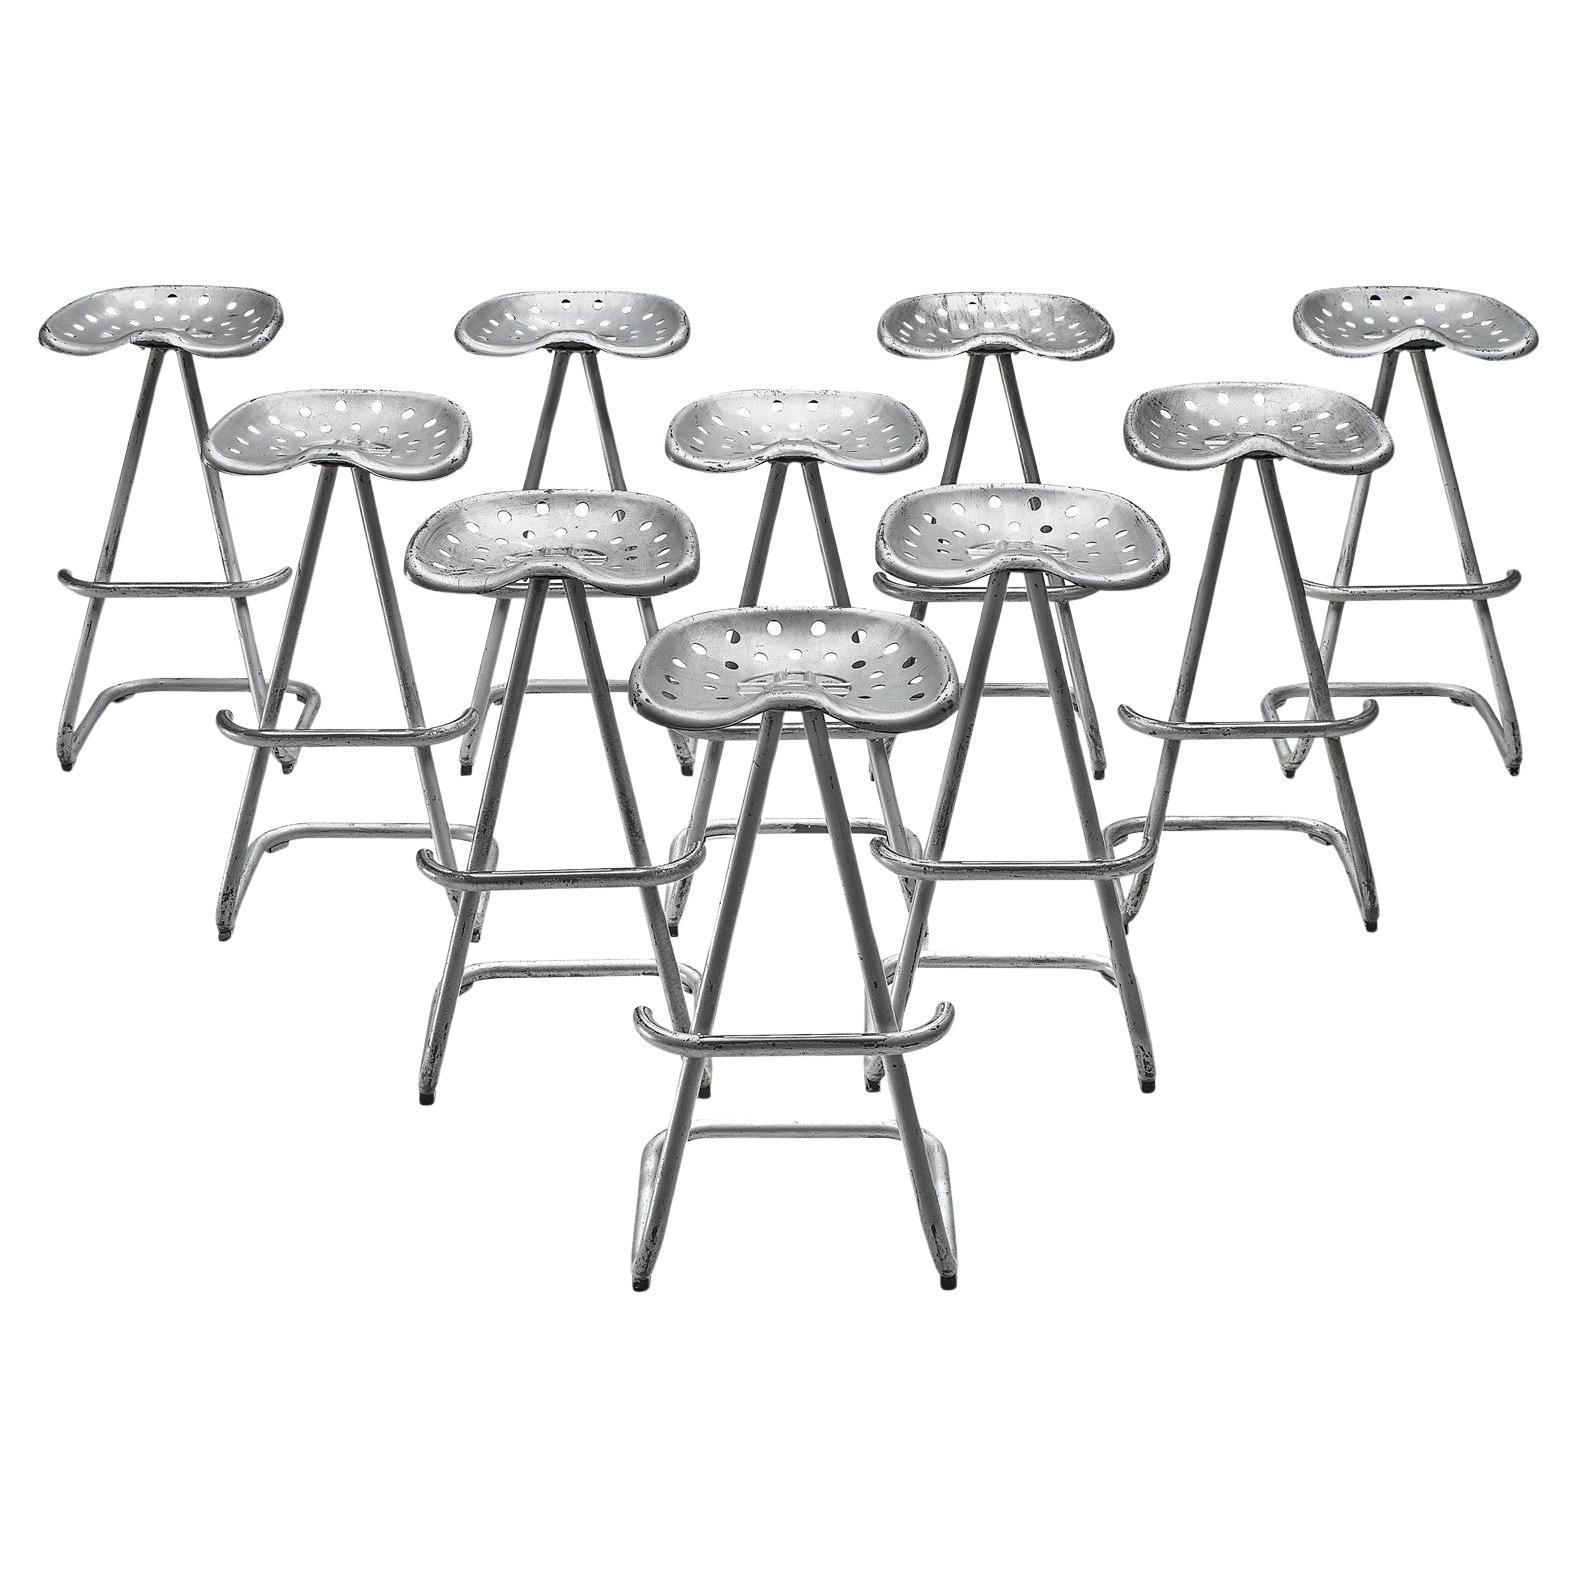  'Tractor' Stools in Silver Colored Metal  For Sale